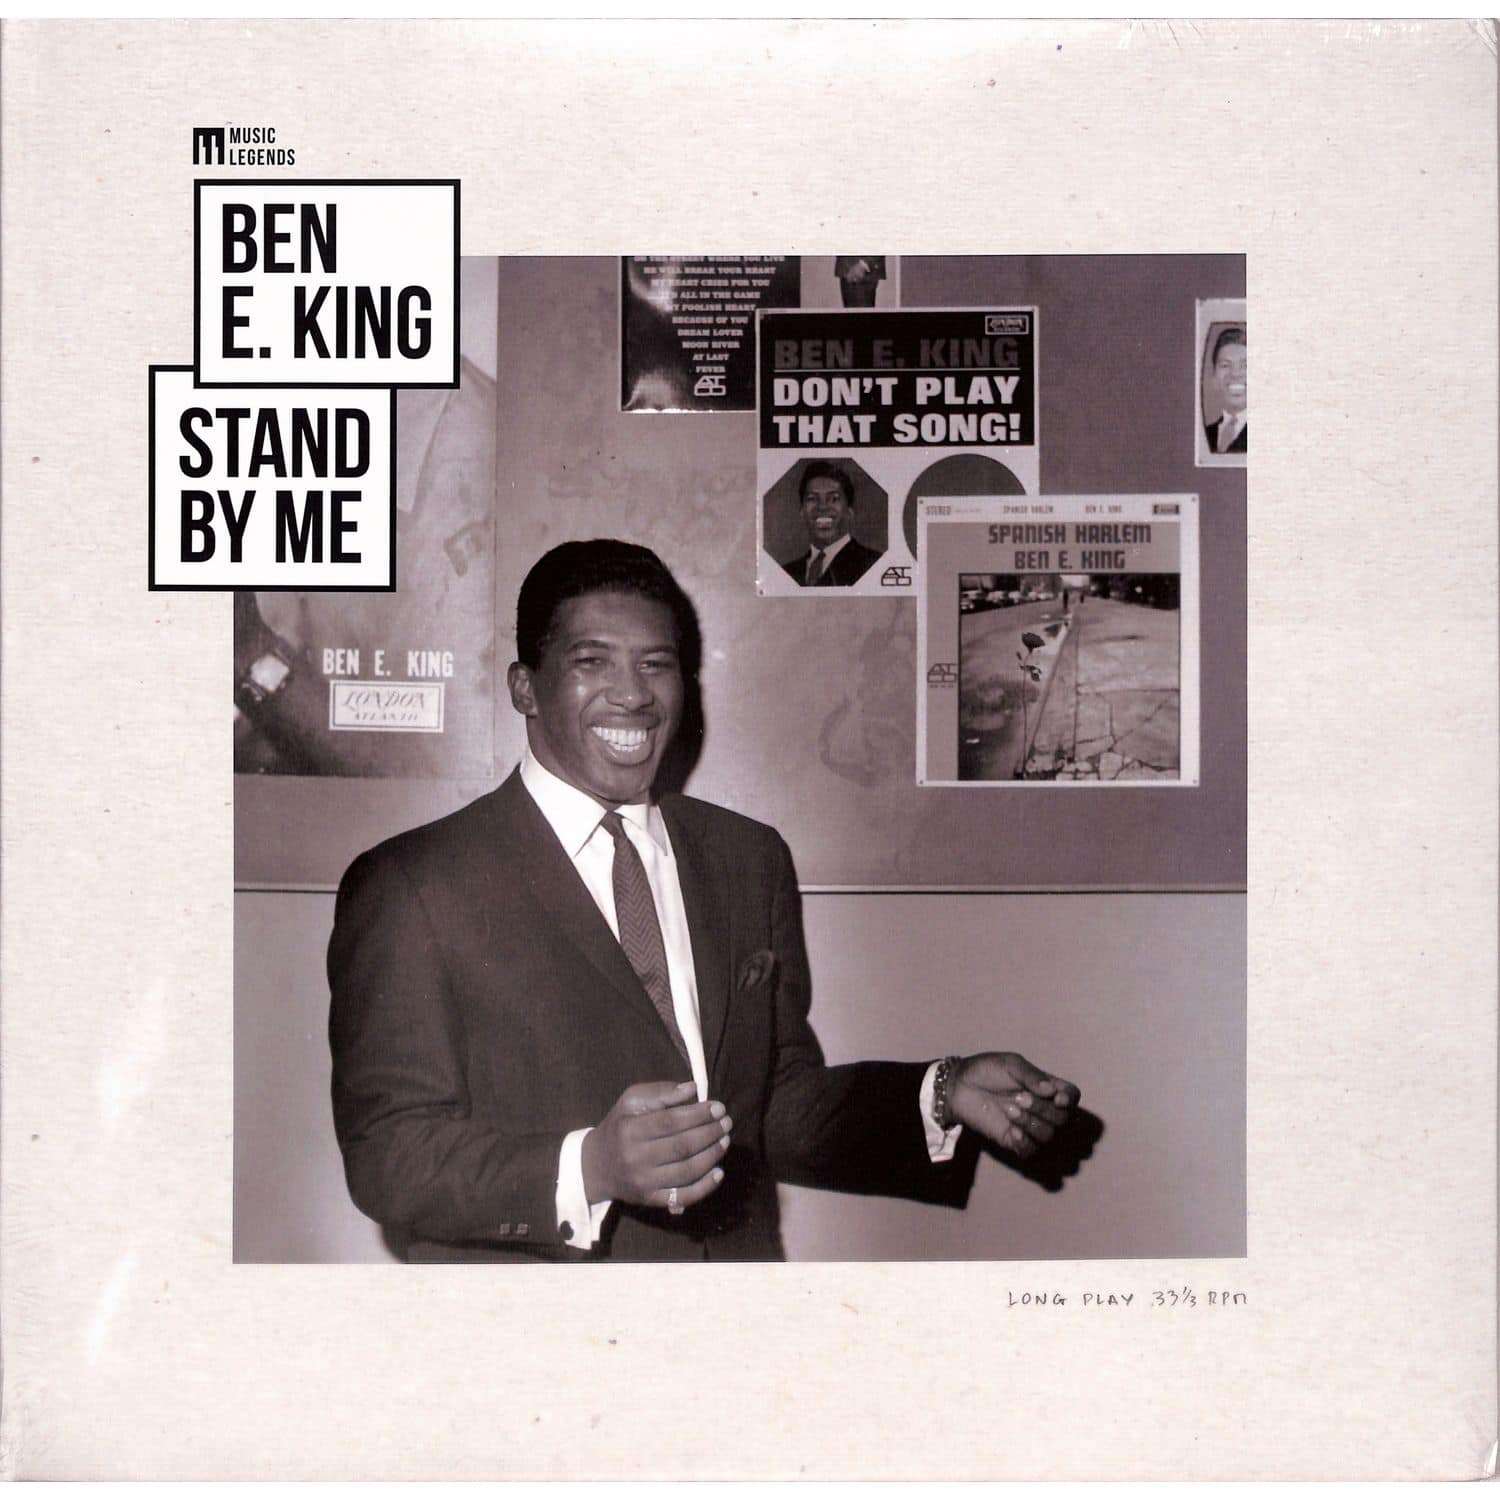 Ben E. King - STAND BY ME 